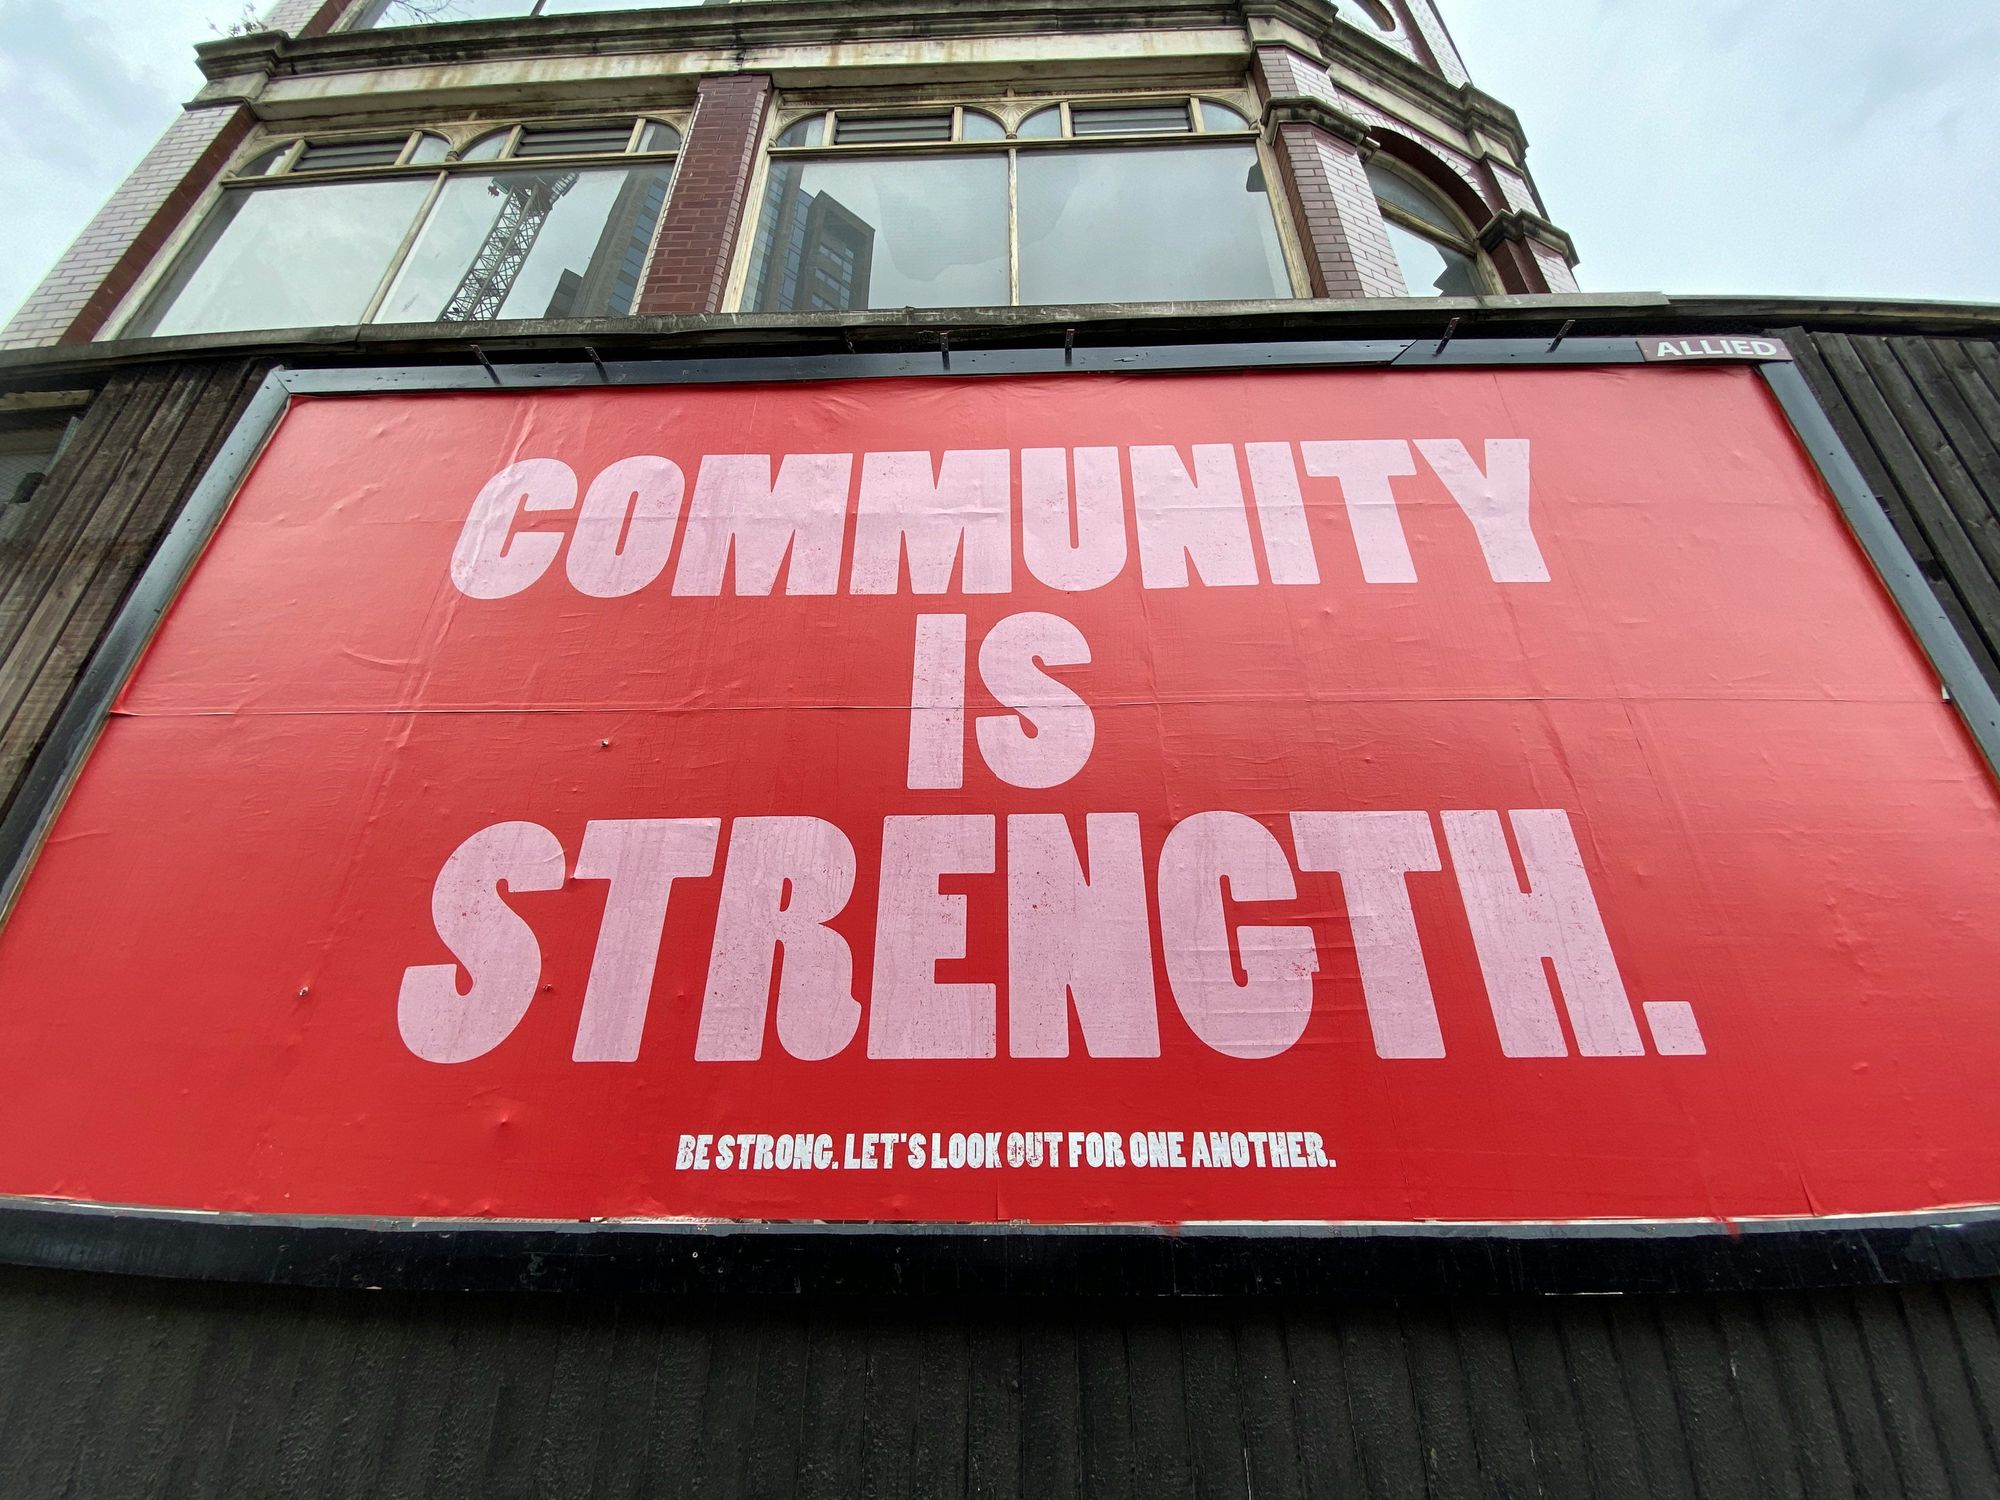 Poster with the phrase "Community is strength."